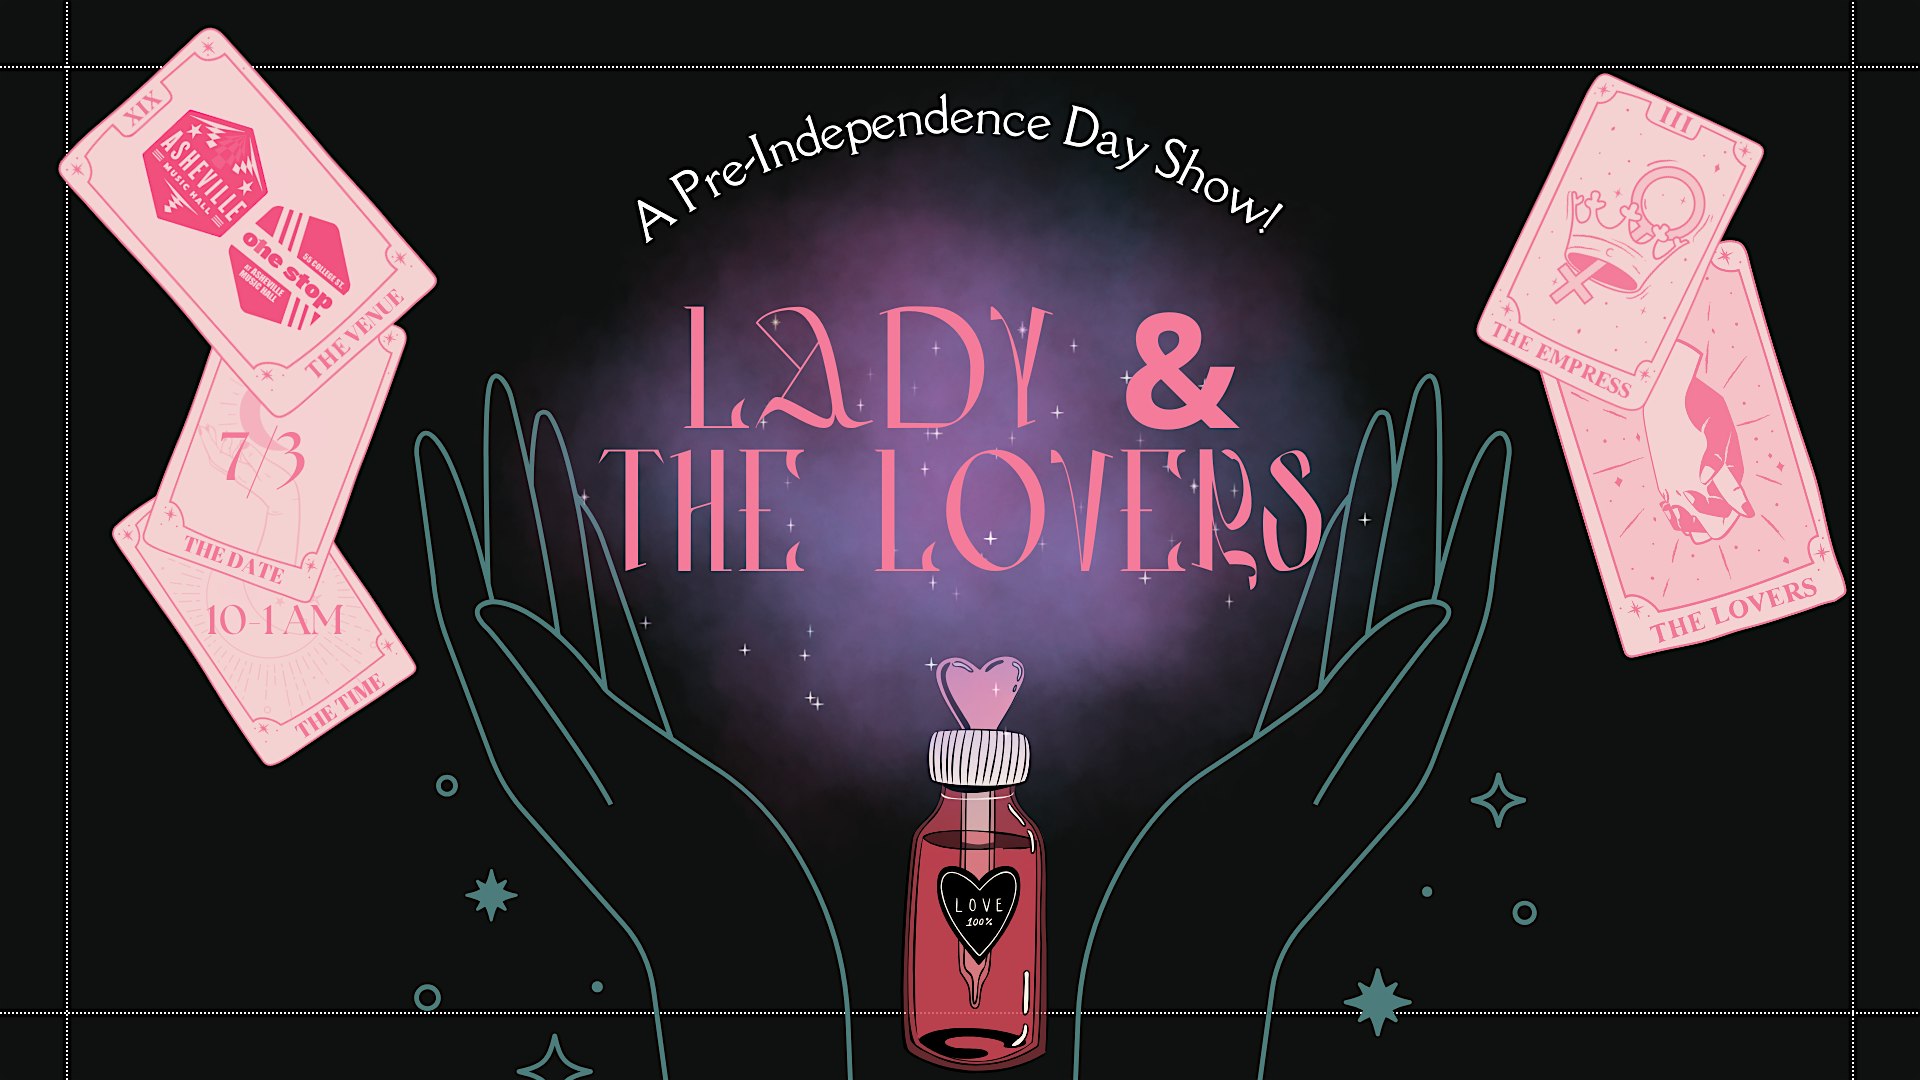 Lady & The Lovers